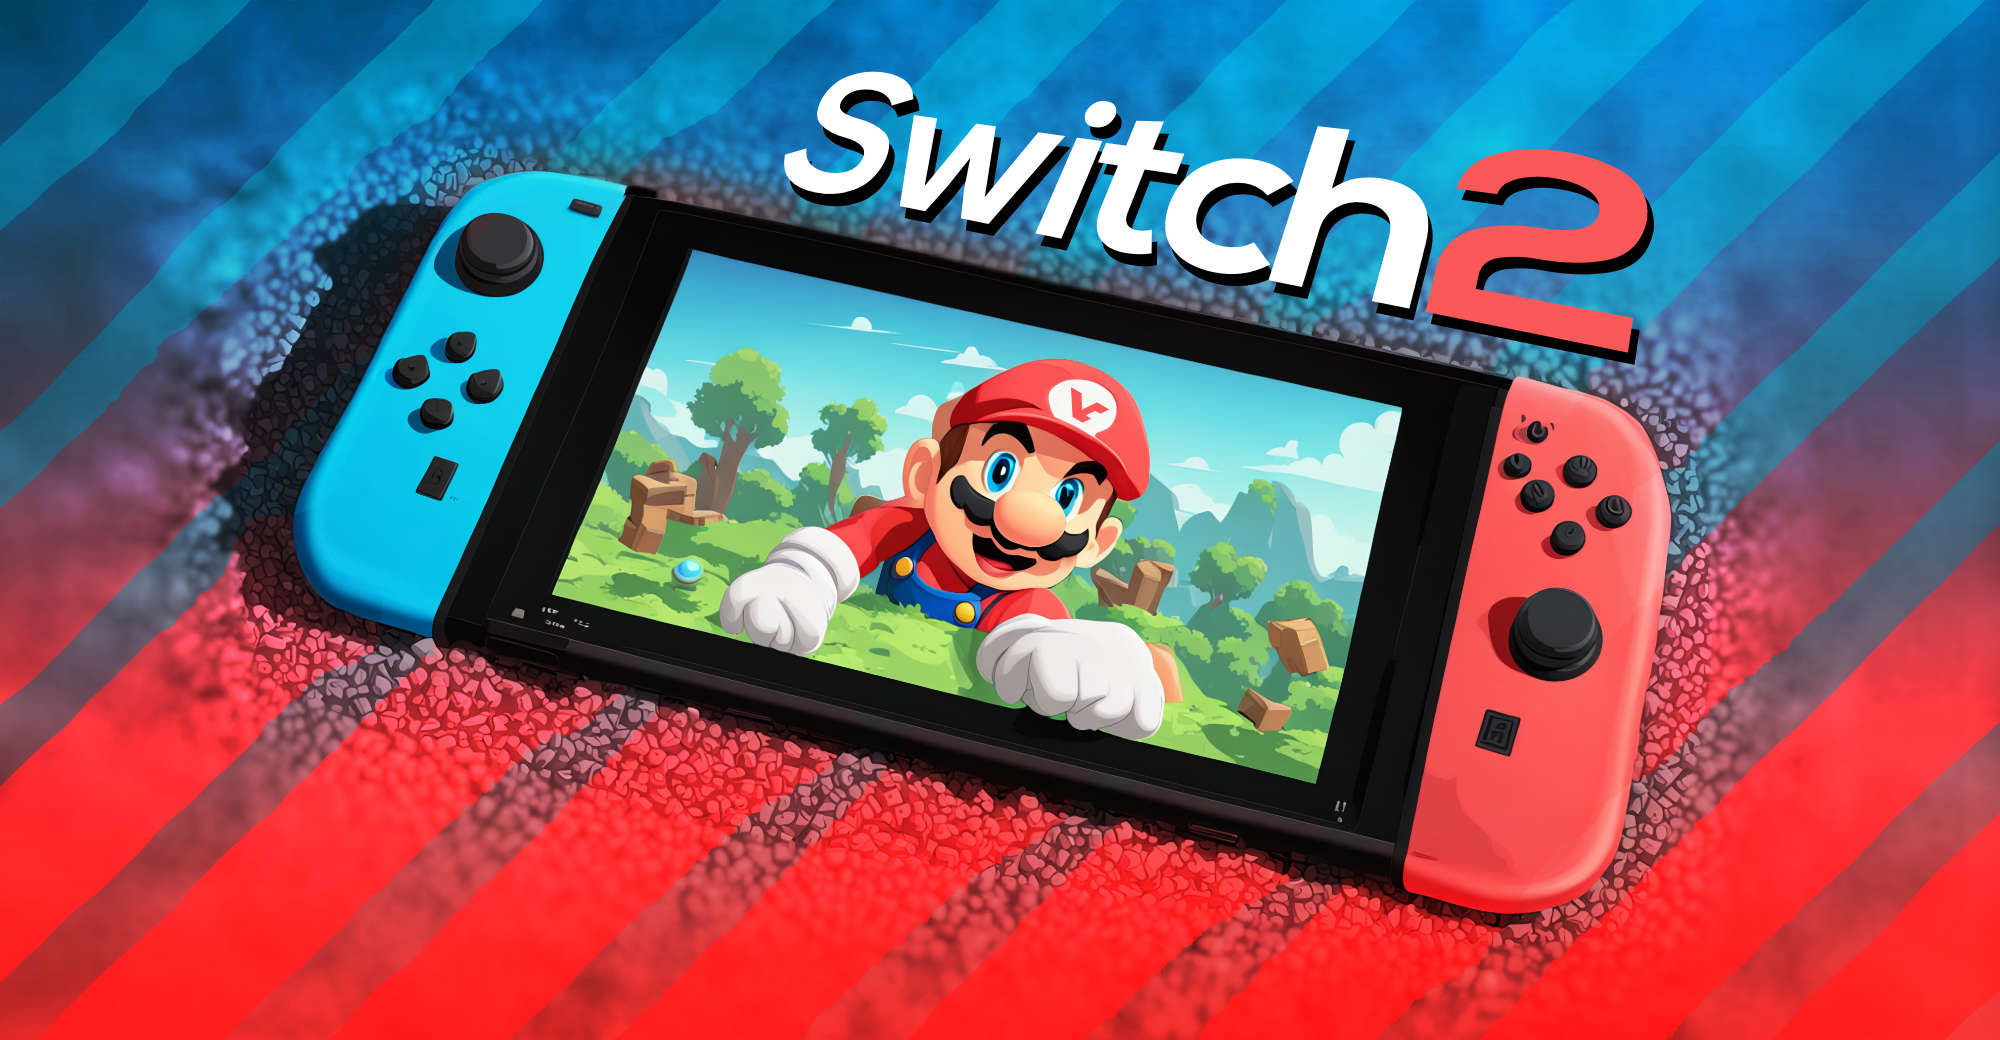 Nintendo Switch 2 reportedly launching in Q1 2025